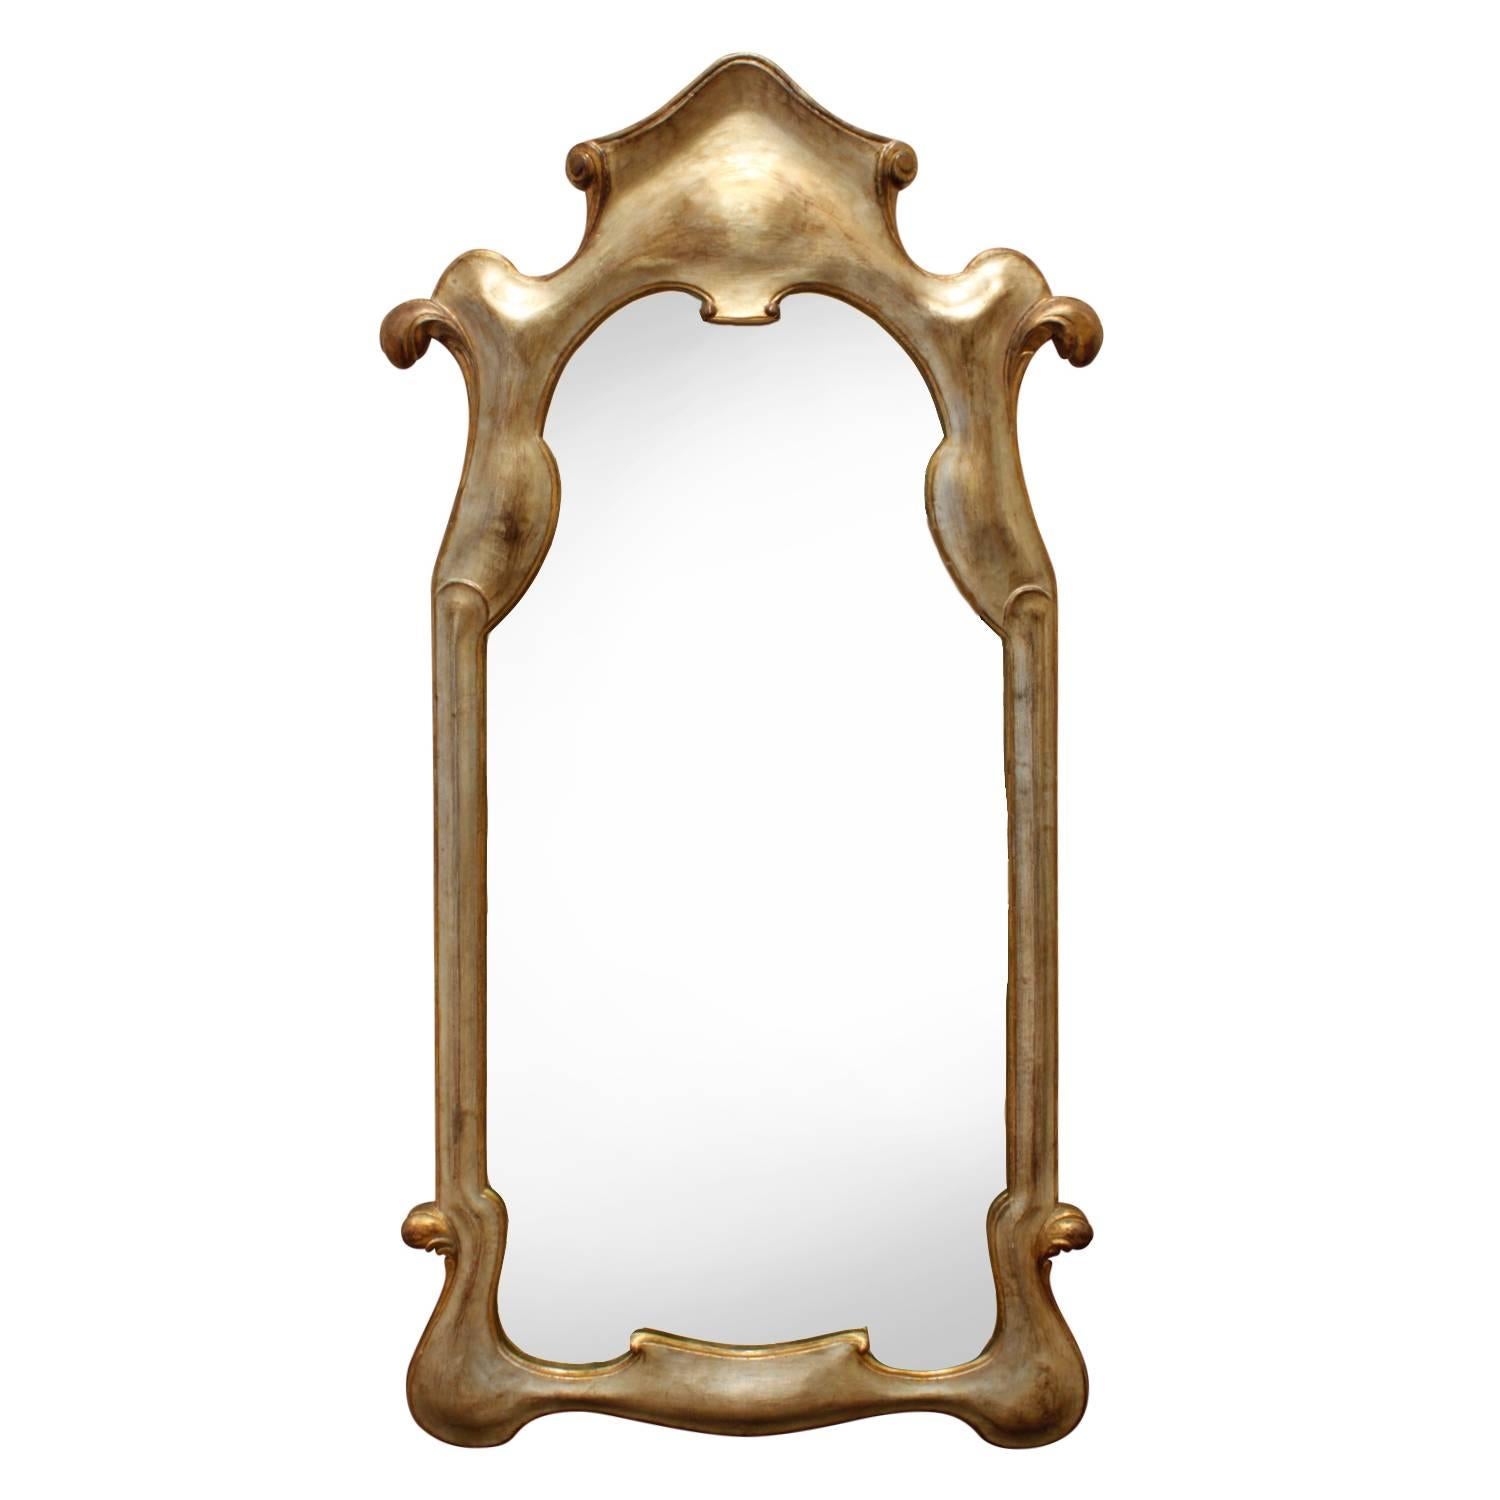 Elegant Mirror with Soft Gold Lacquer Finish, 1940s